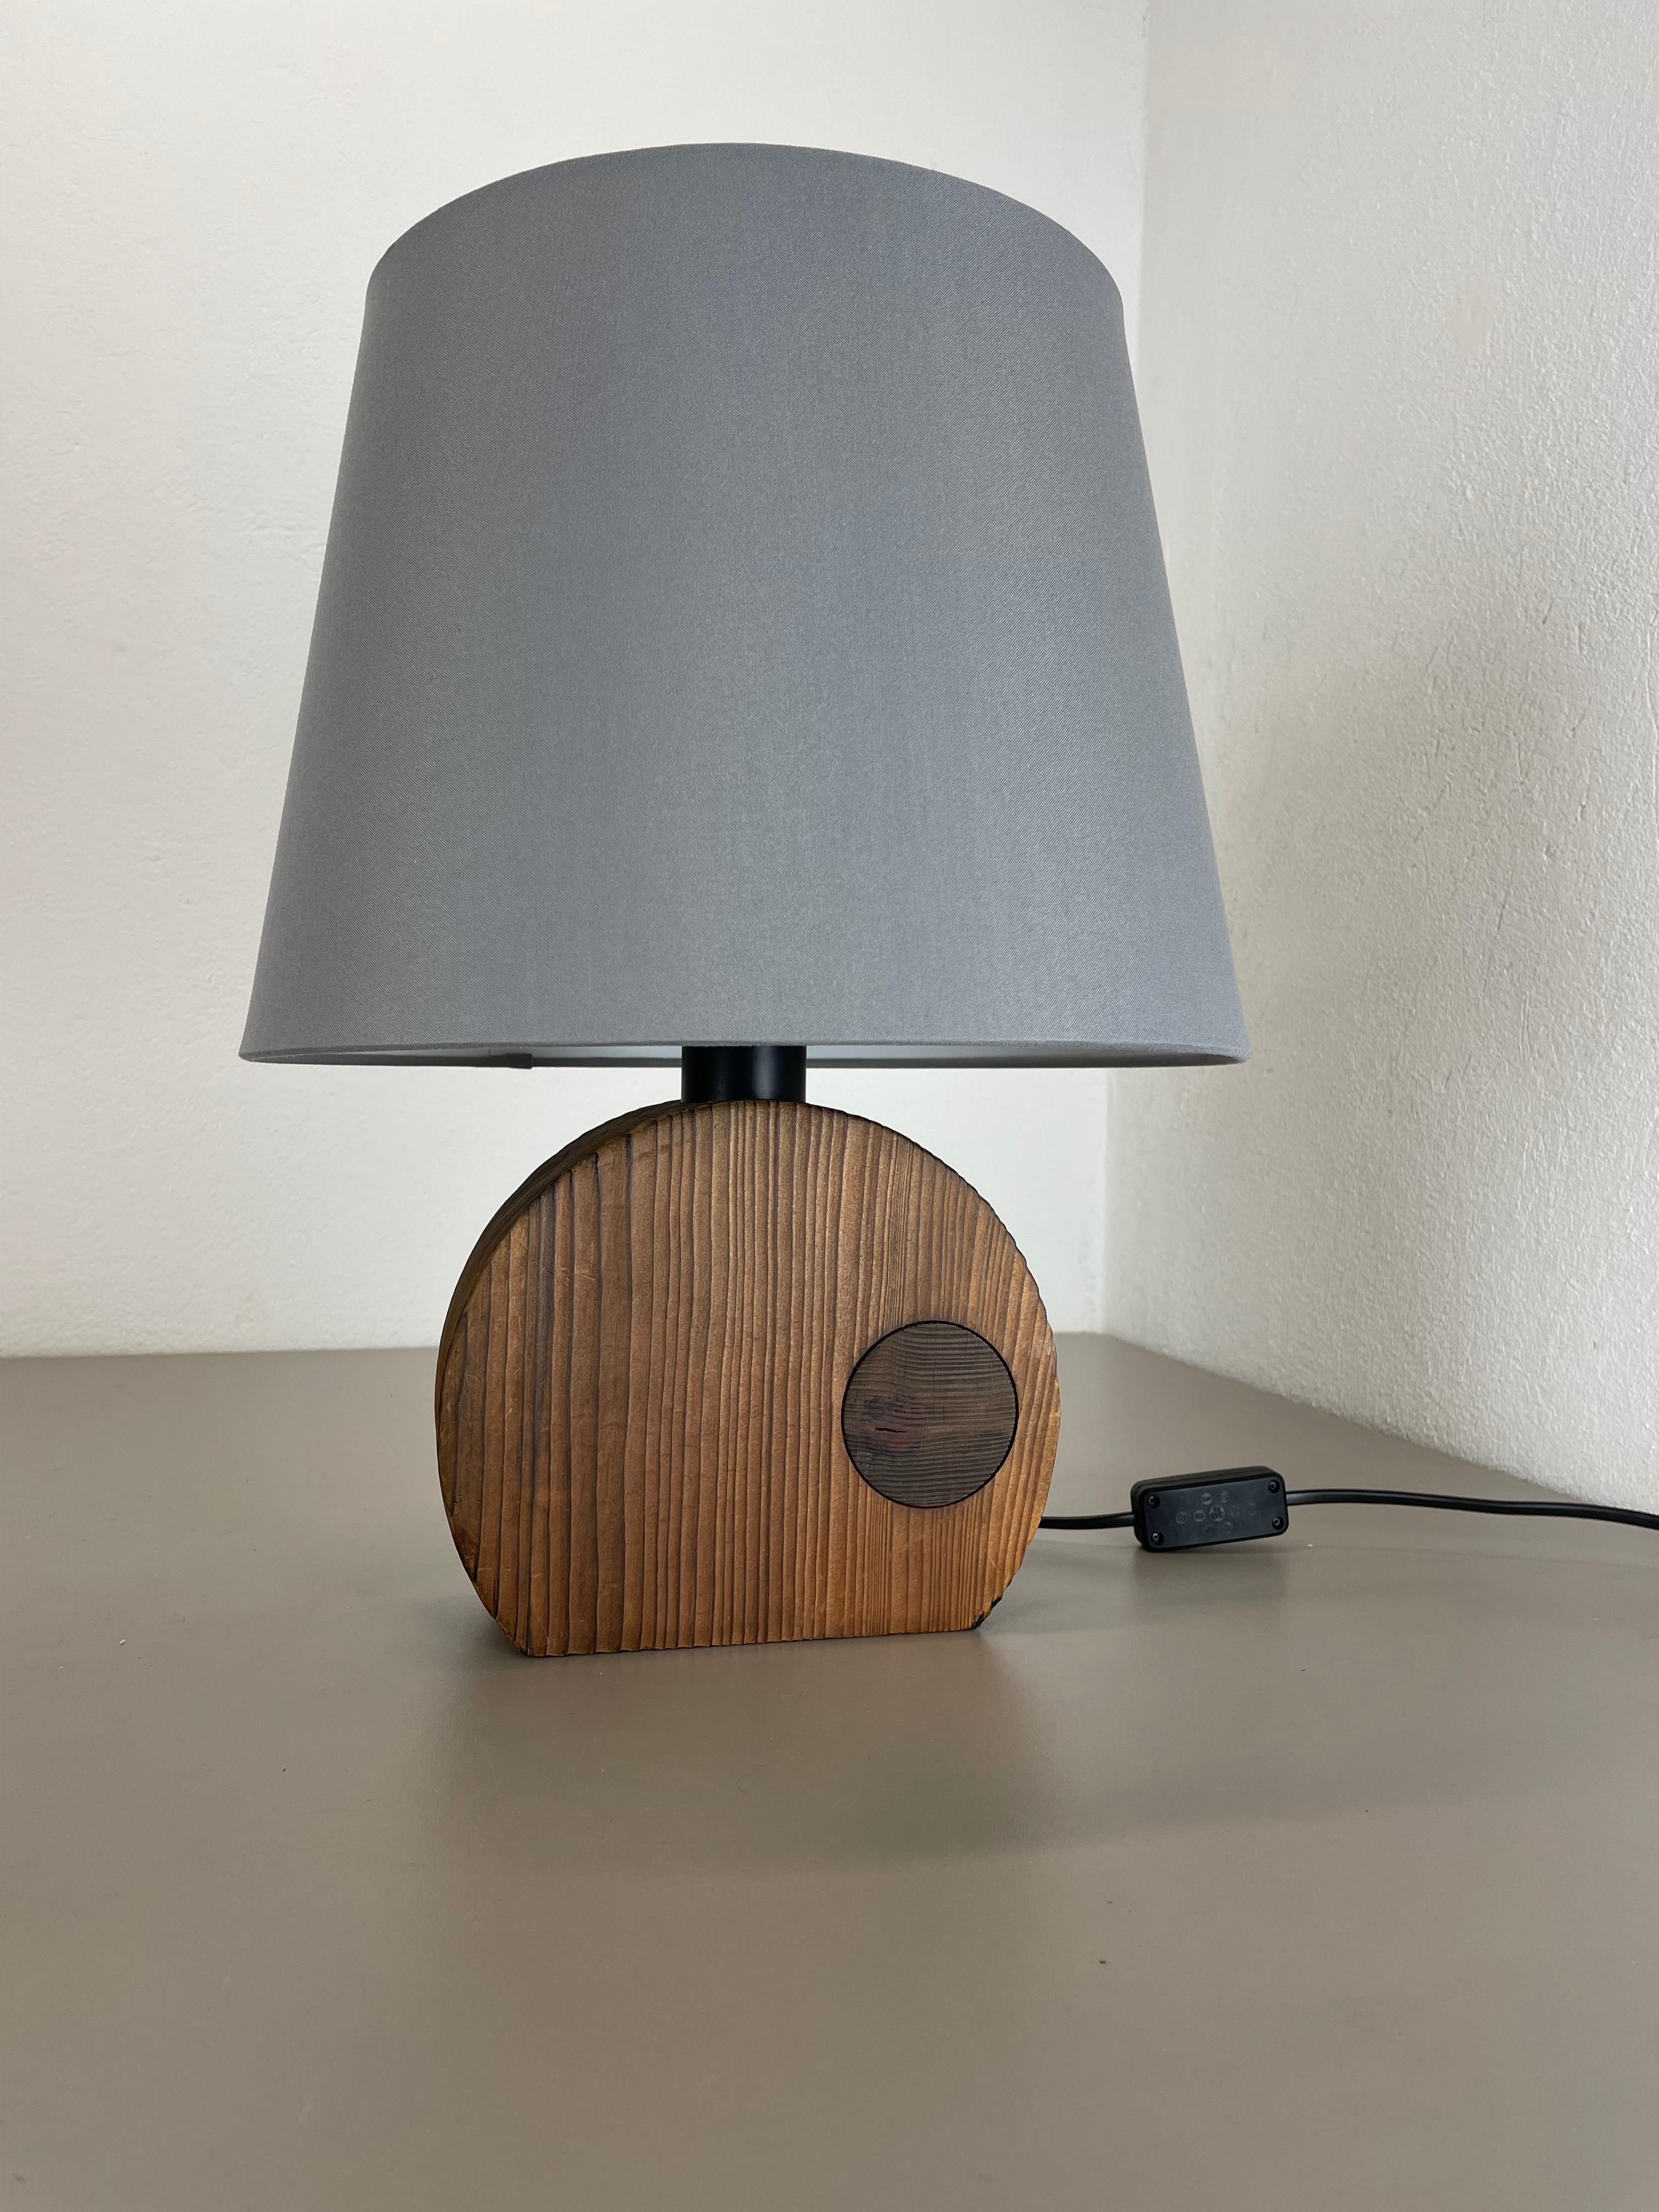 Mid-Century Modern Organic Sculptural Wooden Table Light Made Temde Lights, Germany, 1970s For Sale